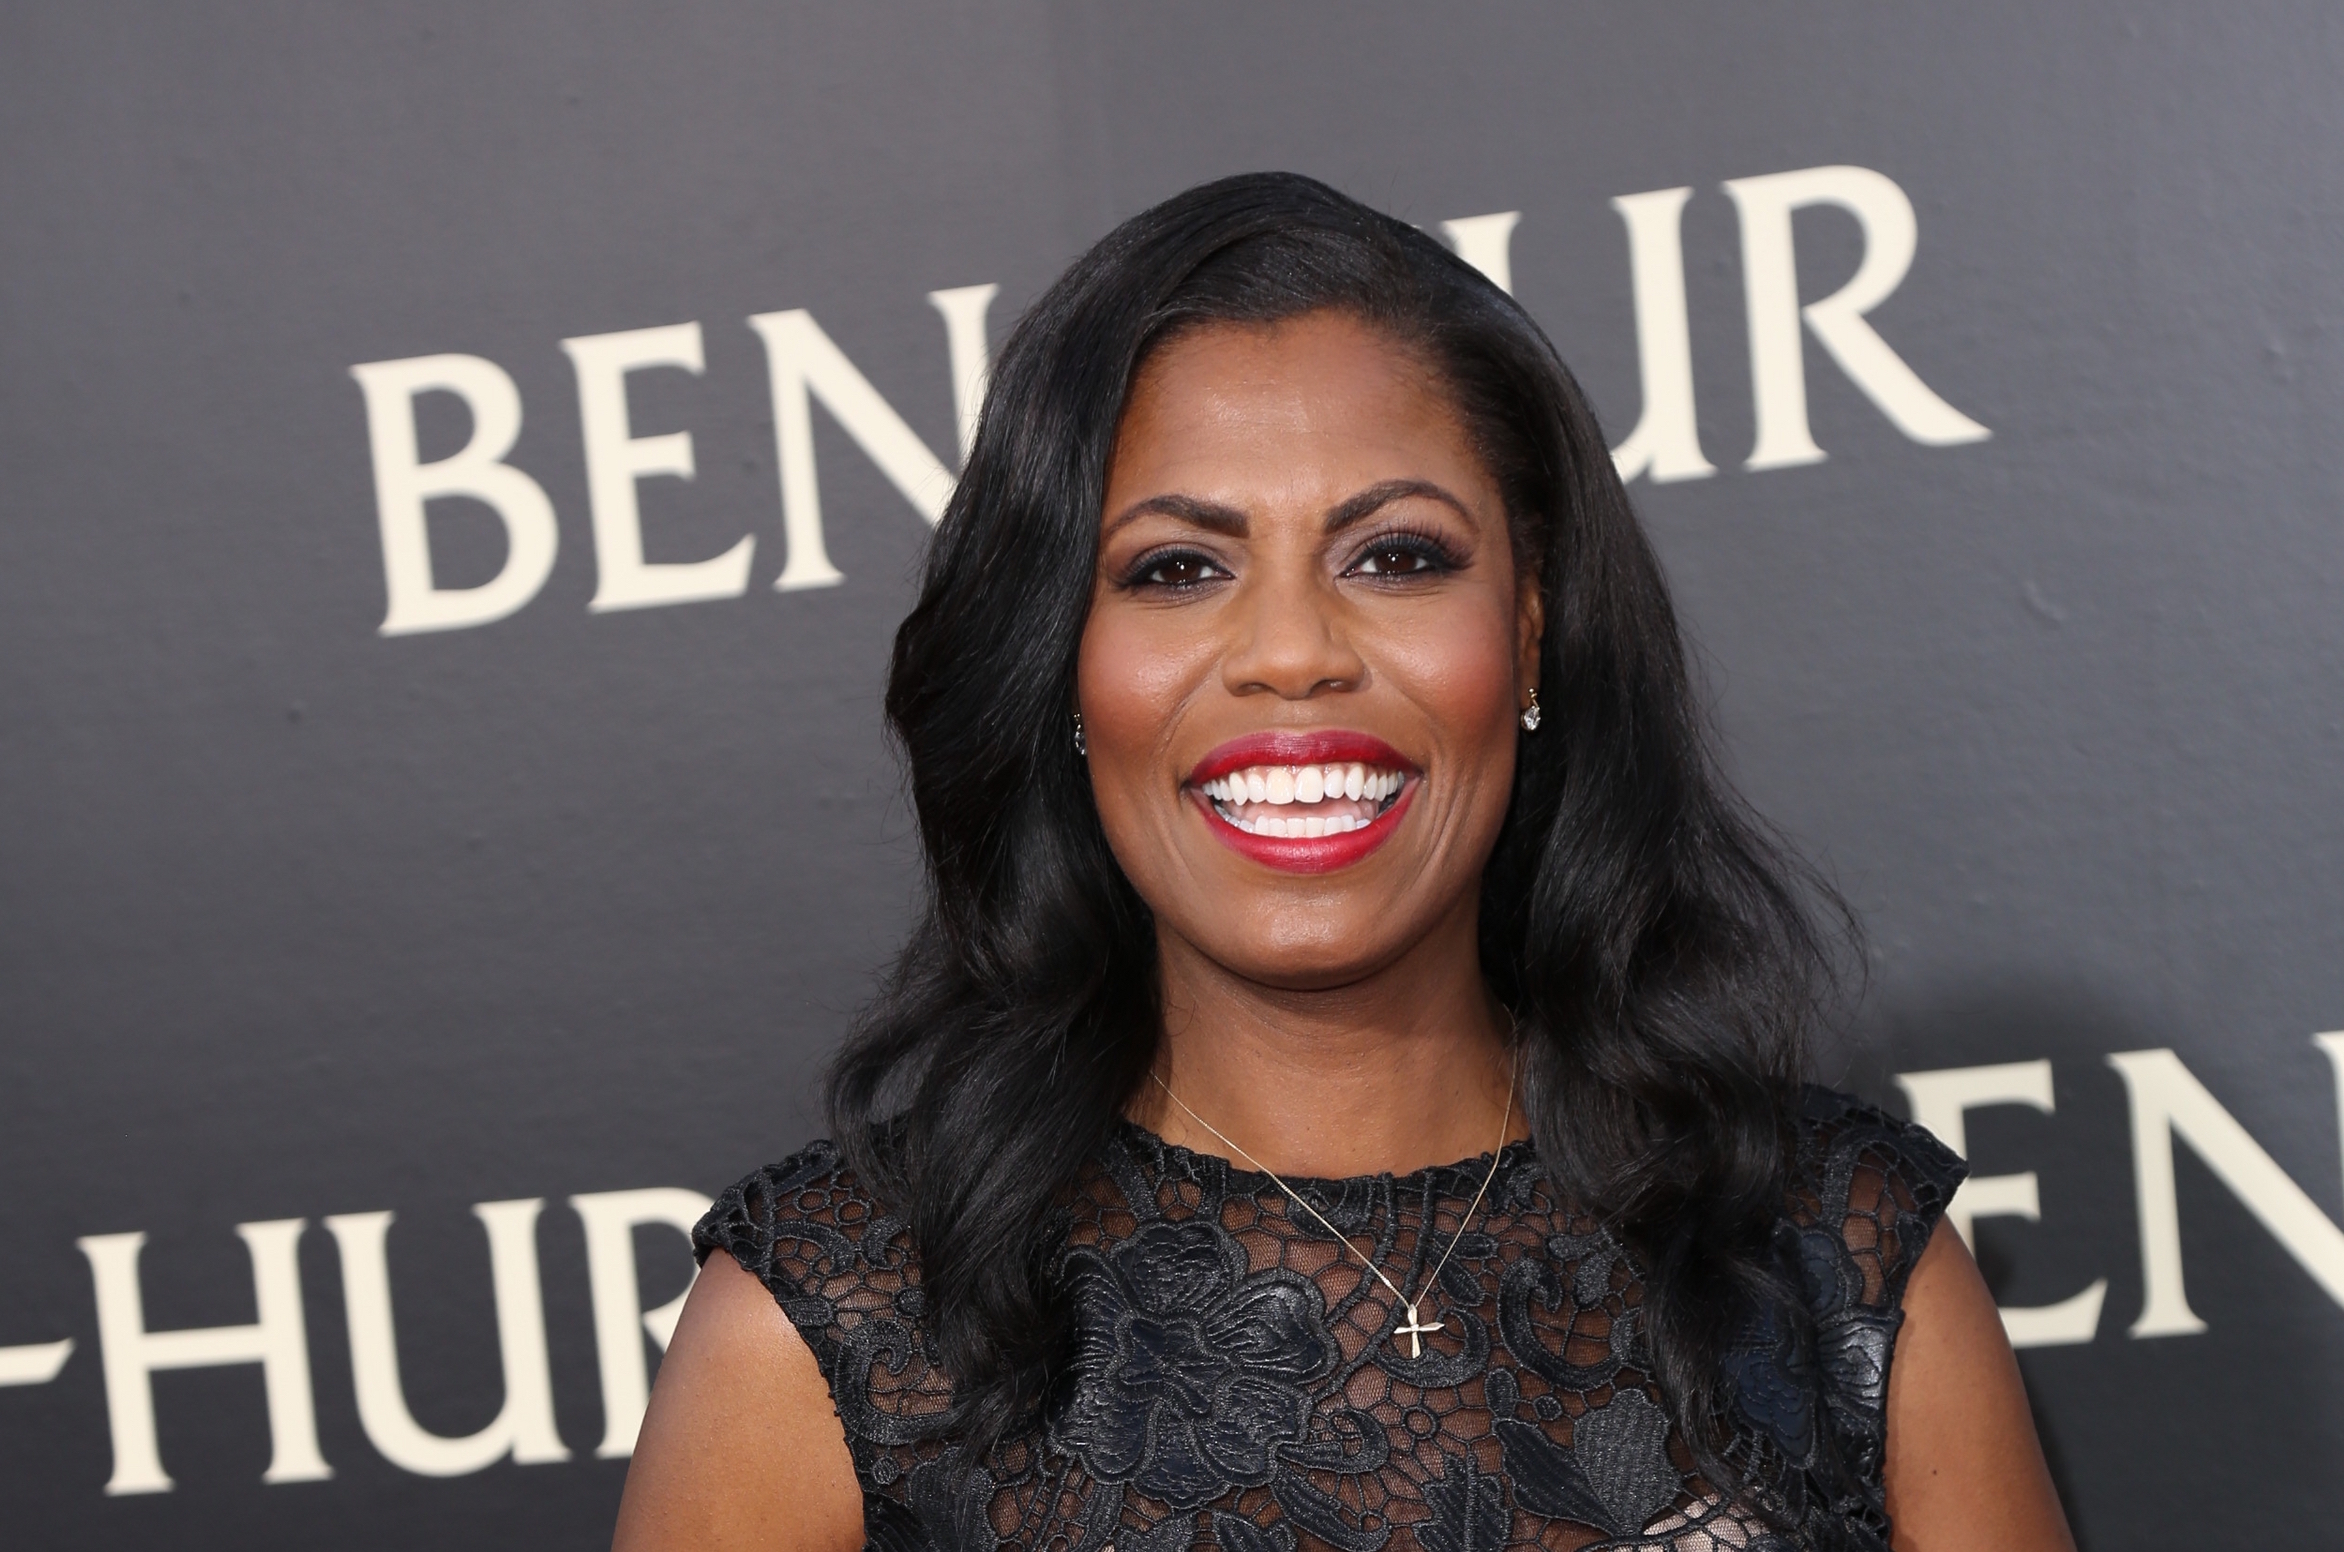 08/16/2016 - Omarosa Manigault - "Ben-Hur" Los Angeles Premiere - Arrivals - TCL Chinese Theatre IMAX, Hollywood & Highland, 6925 Hollywood Boulevard - Hollywood, CA, USA - Keywords: Vertical, Adventure, Drama, Movie Premiere, Red Carpet Event, Arrival, Attending, People, Person, Portrait, Photography, Film Industry, Arts Culture and Entertainment, Celebrity, Celebrities, TCL Chinese Theater, LightWorkers Media, Metro-Goldwyn-Mayer (MGM), Paramount Pictures See, Los Angeles California Orientation: Portrait Face Count: 1 - False - Photo Credit: Guillermo Proano / PR Photos - Contact (1-866-551-7827) - Portrait Face Count: 1